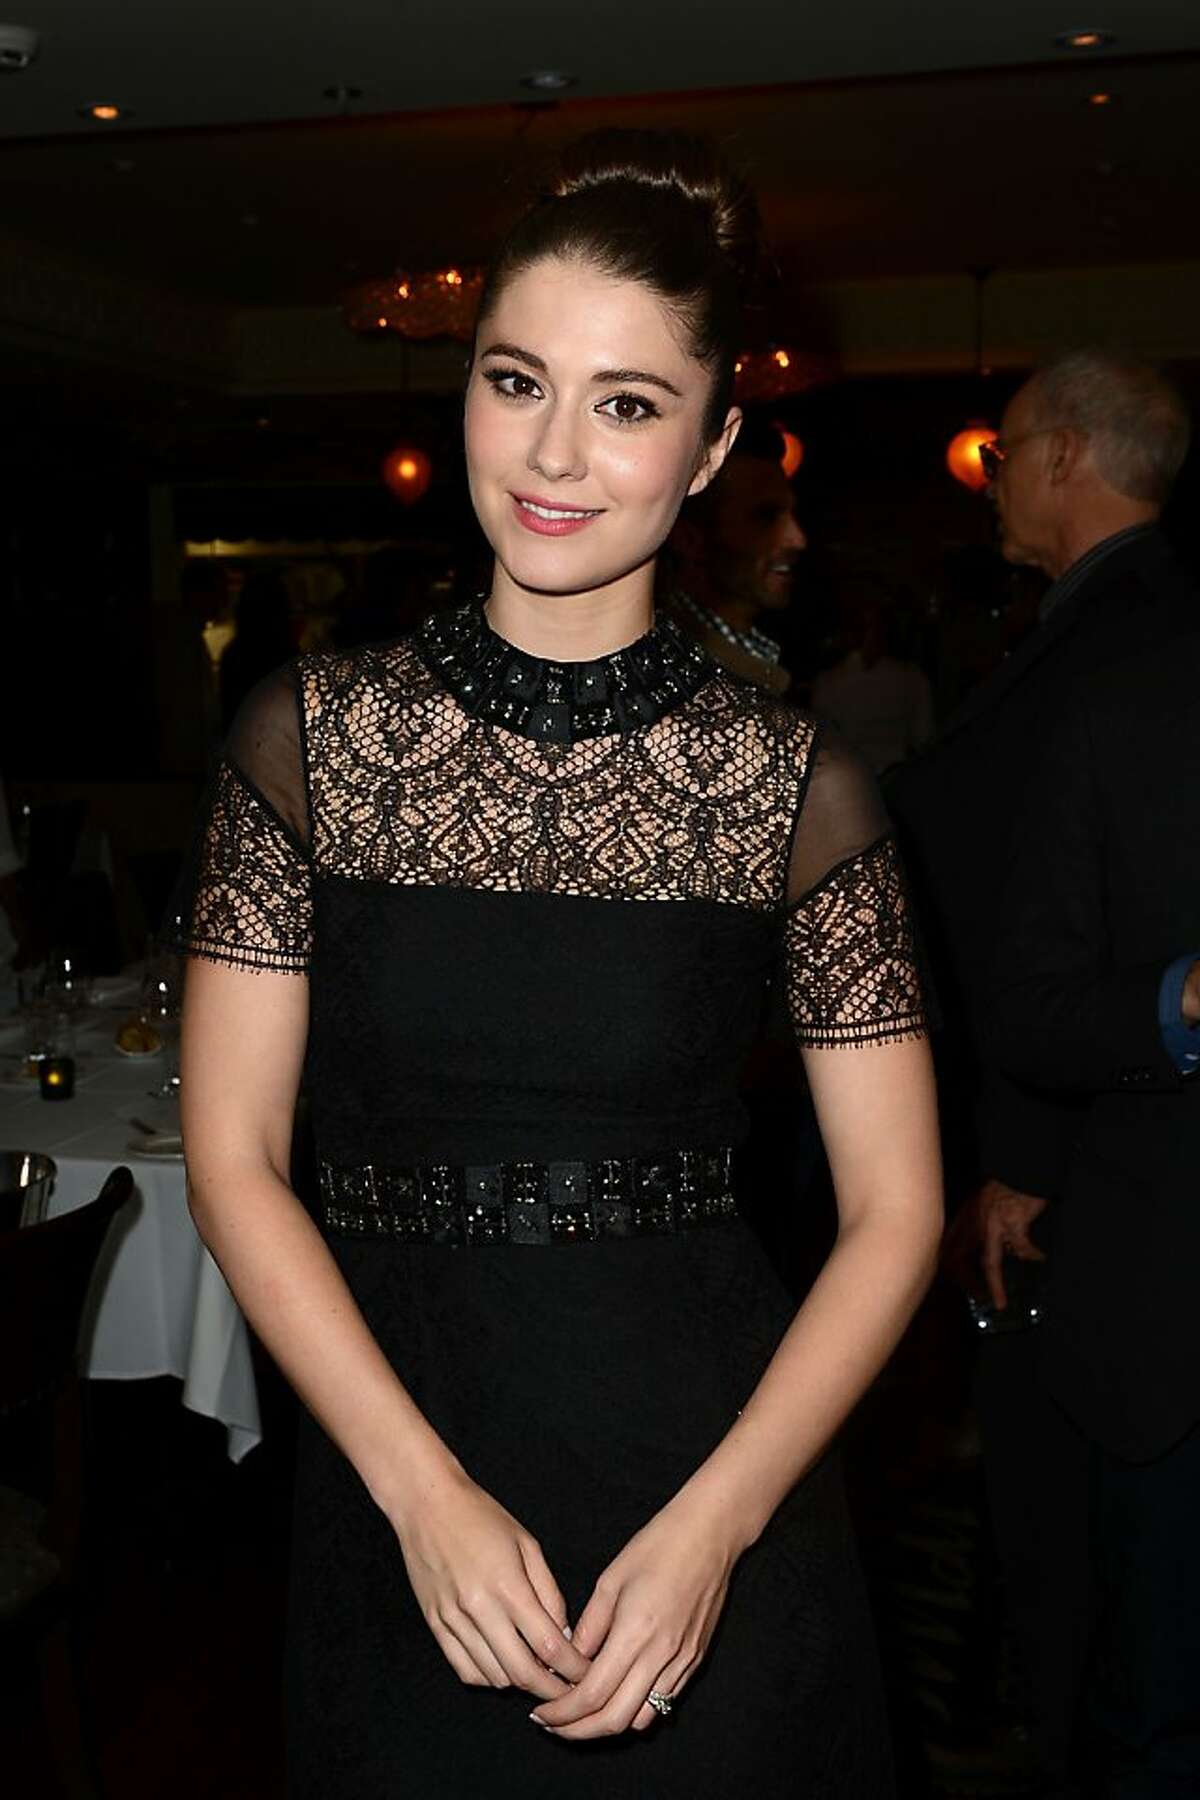 TORONTO, ON - SEPTEMBER 08: Actress Mary Elizabeth Winstead attends the Sony Pictures cocktail hour during the 2012 Toronto International Film Festival at the Creme Brasserie on September 8, 2012 in Toronto, Canada. (Photo by Mark Davis/Getty Images)